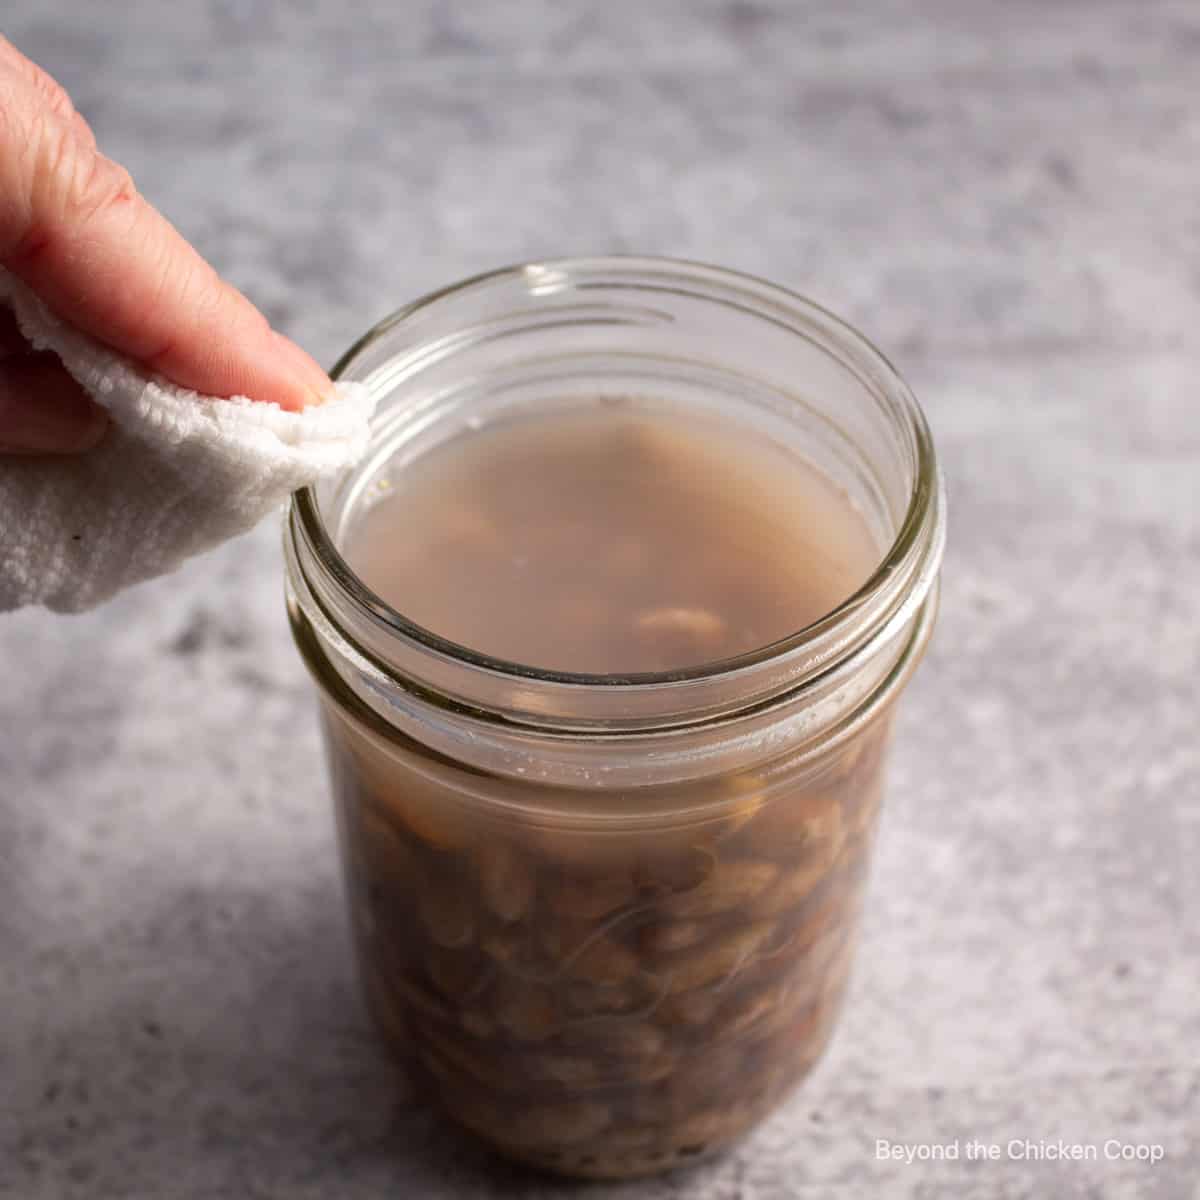 Wiping the rim of a canning jar.